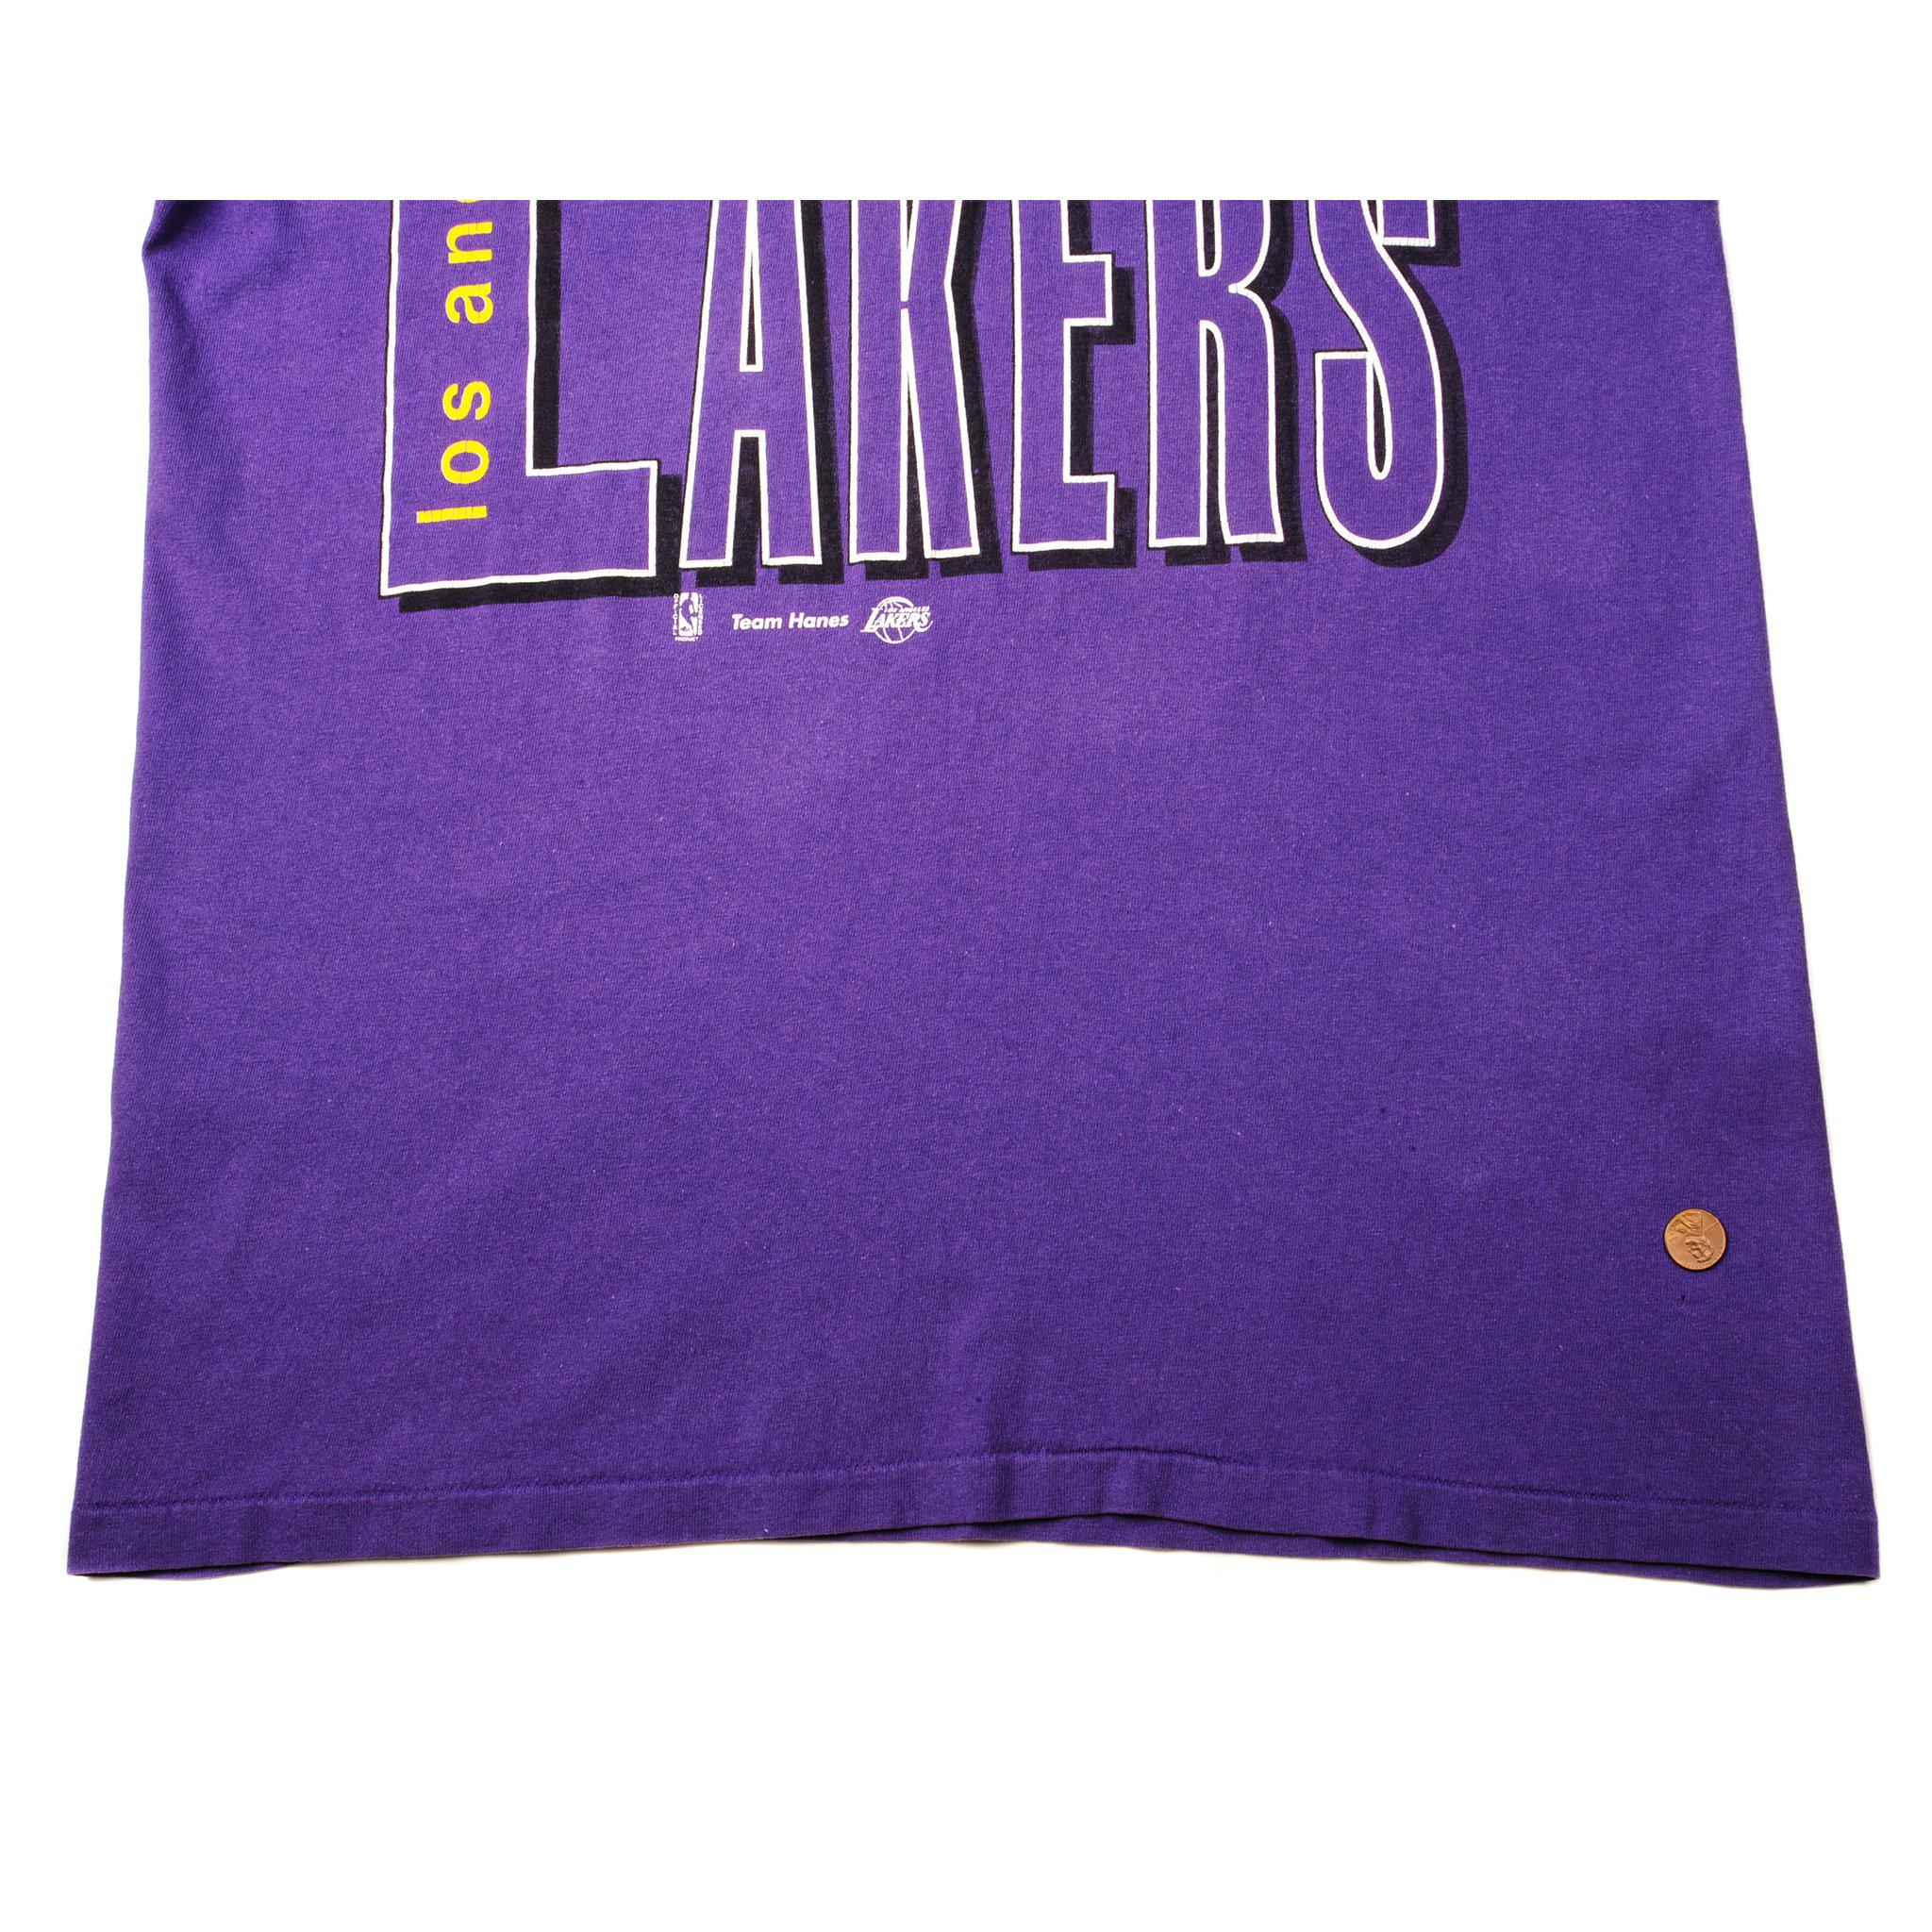 Vintage NBA La Lakers Tee Shirt 1980s Size Large Made in USA